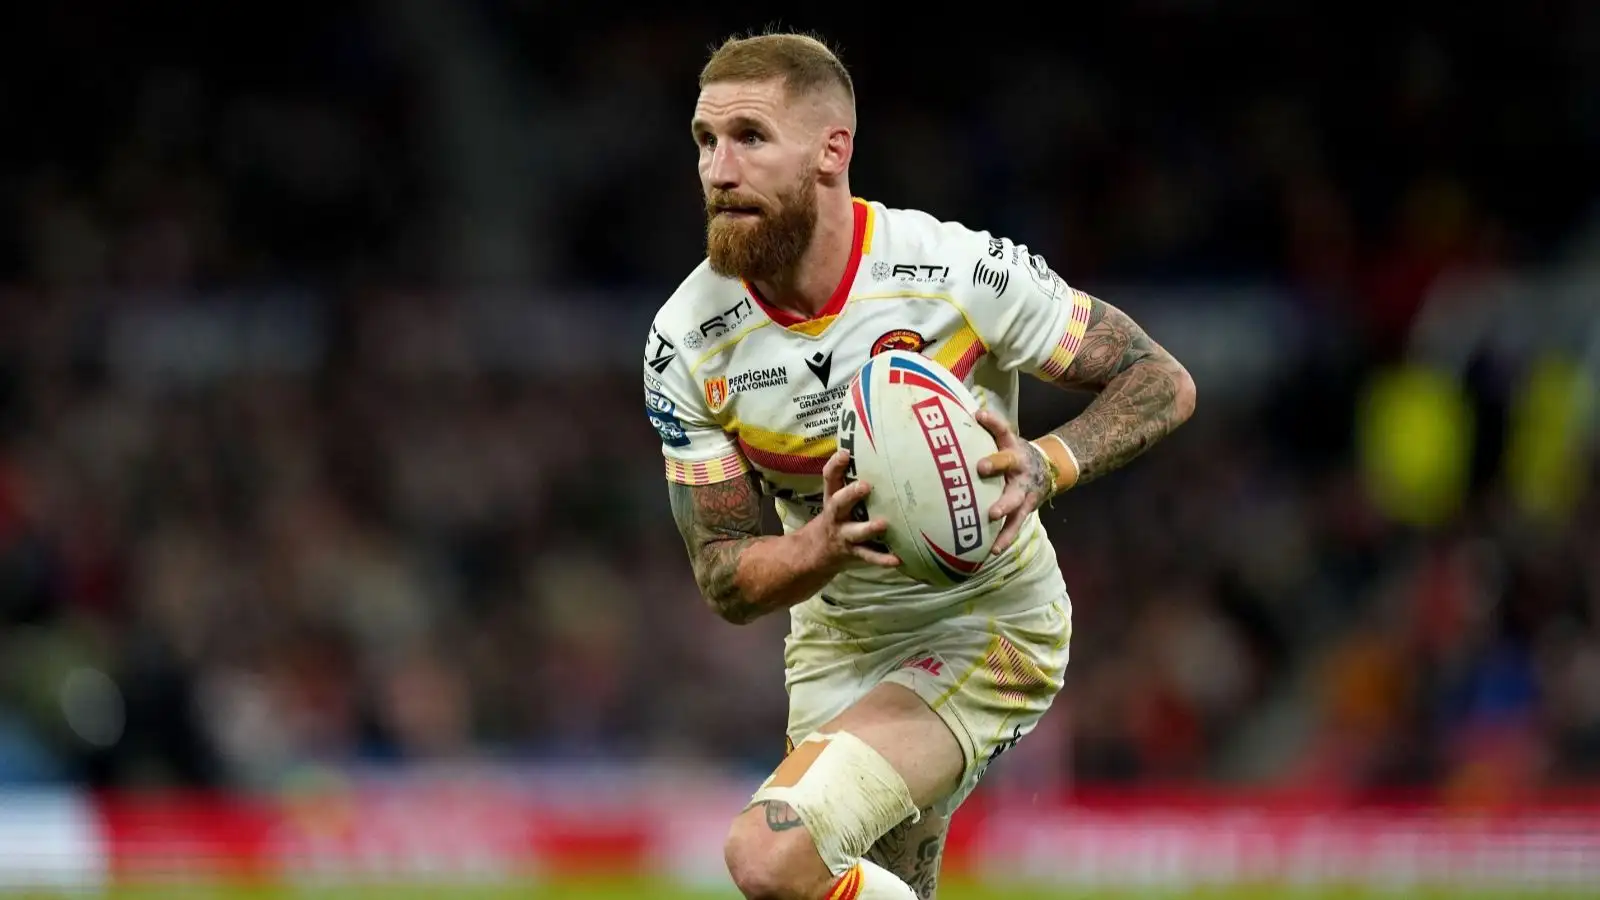 Sam Tomkins focused on family life having bowed out at Old Trafford; Wants to be ‘the best dad ever’